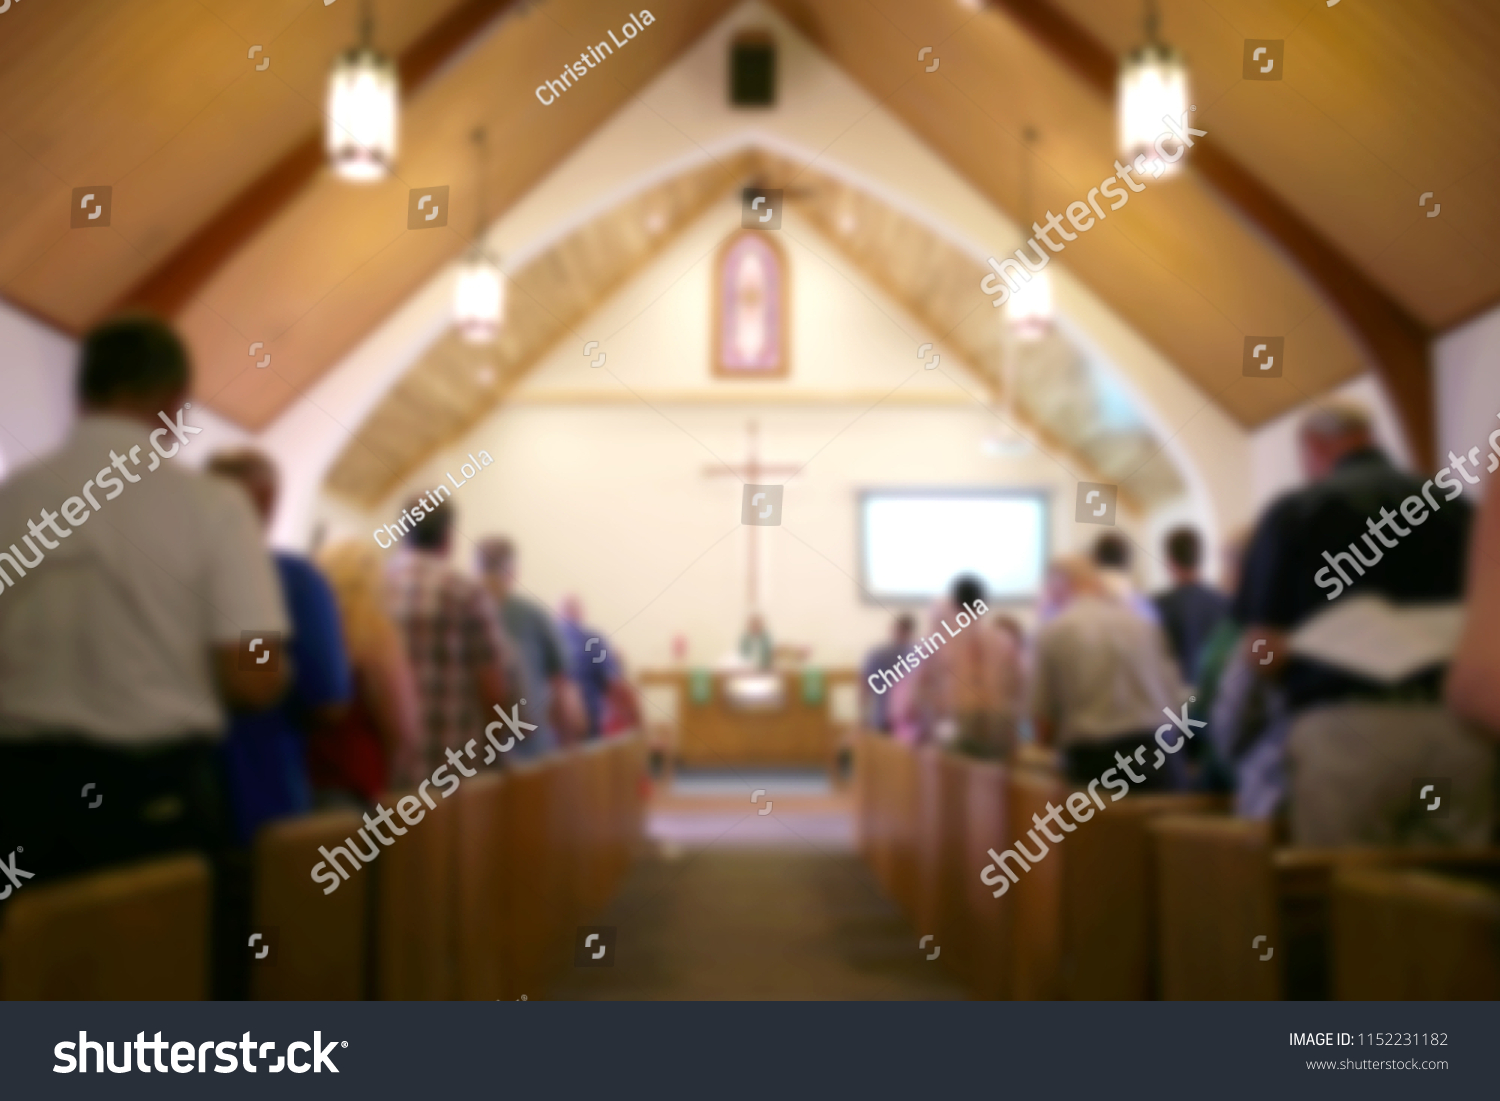 A blurred photo of the inside of a church sanctuary that is filled with people in the pews, and the pastor stands under a large cross at the altar. #1152231182